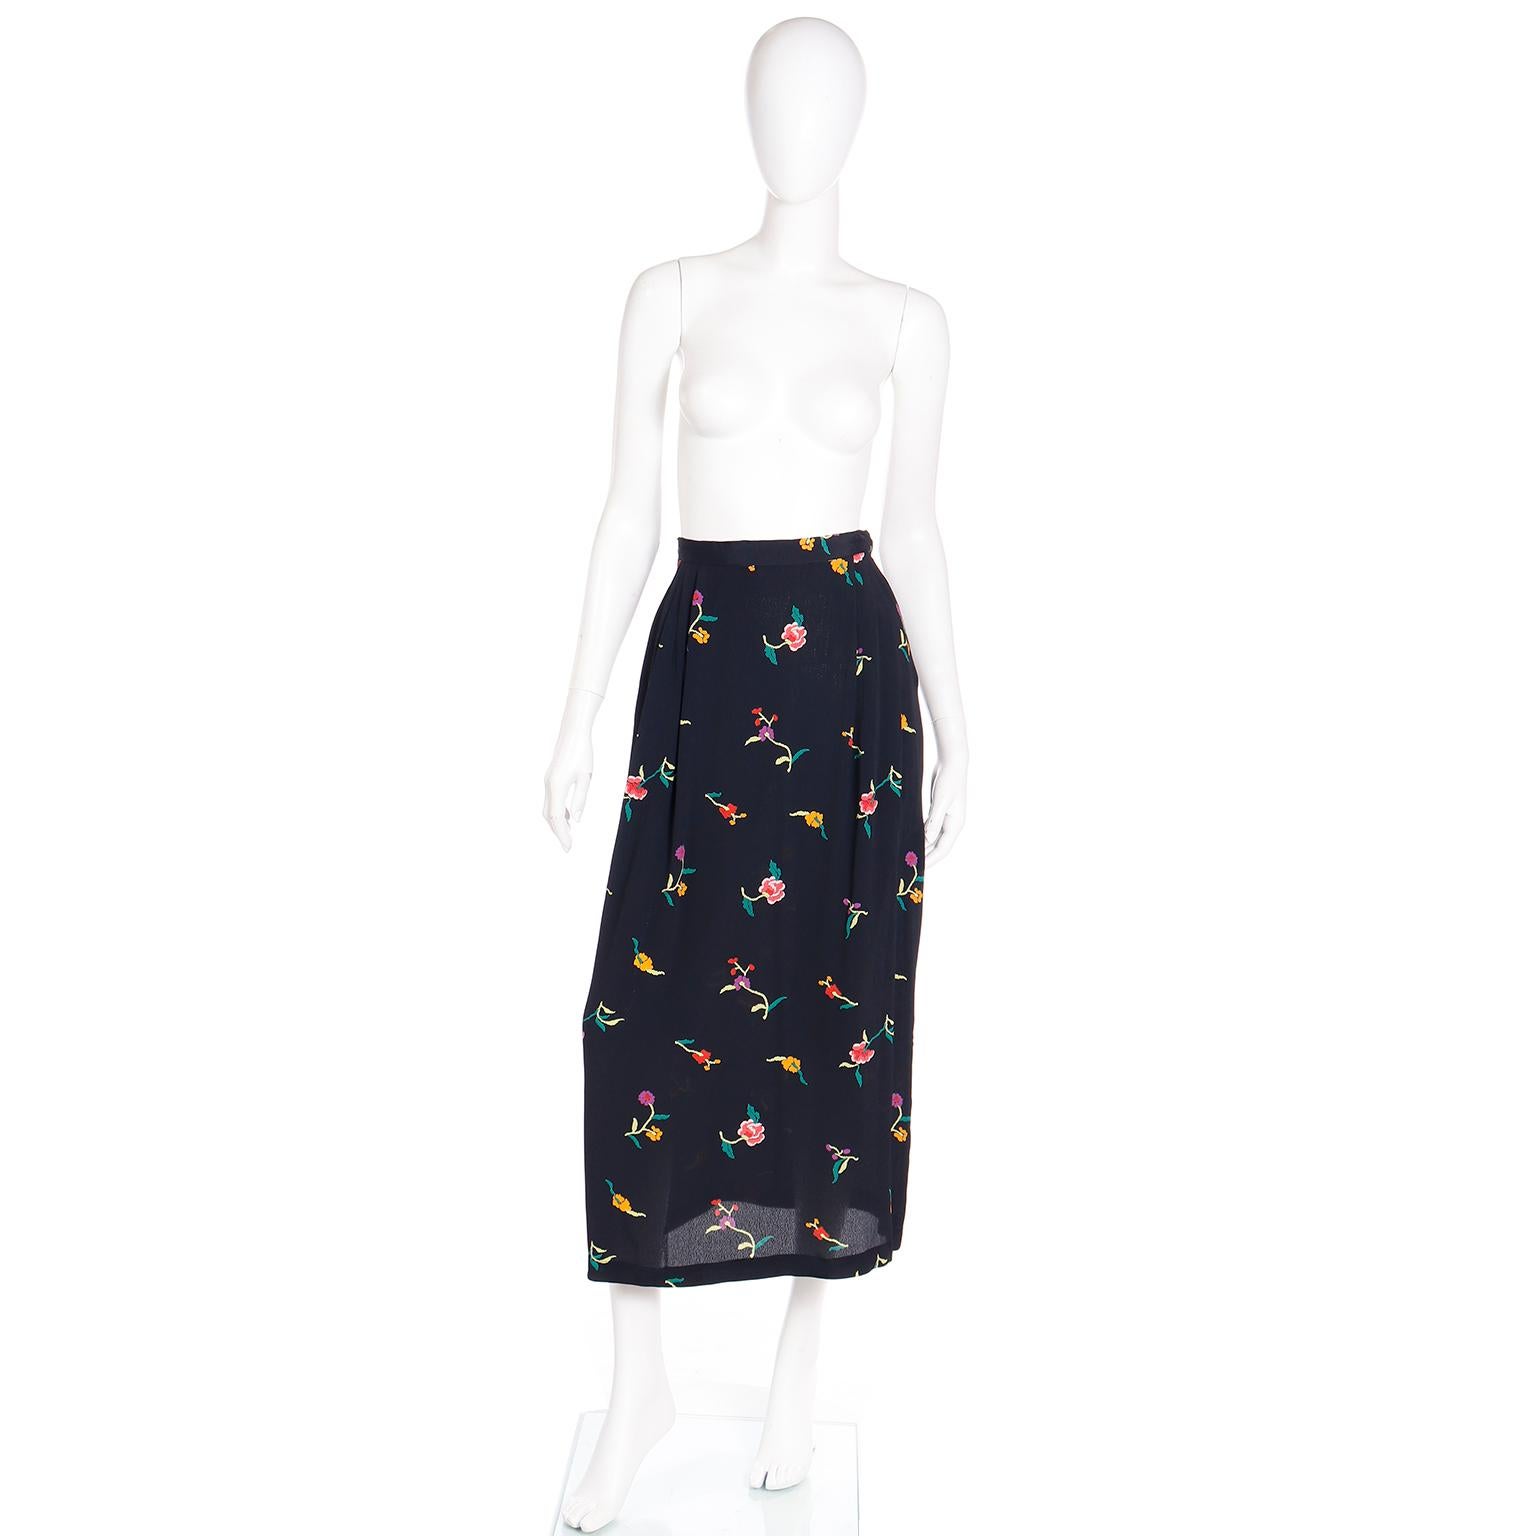 This vintage 1980's Norma Kamali Skirt is in a pretty printed floral pattern with pink, yellow and red flowers with green stems on a black background. We love vintage Norma Kamali pieces and this skirt would be such a great addition to any